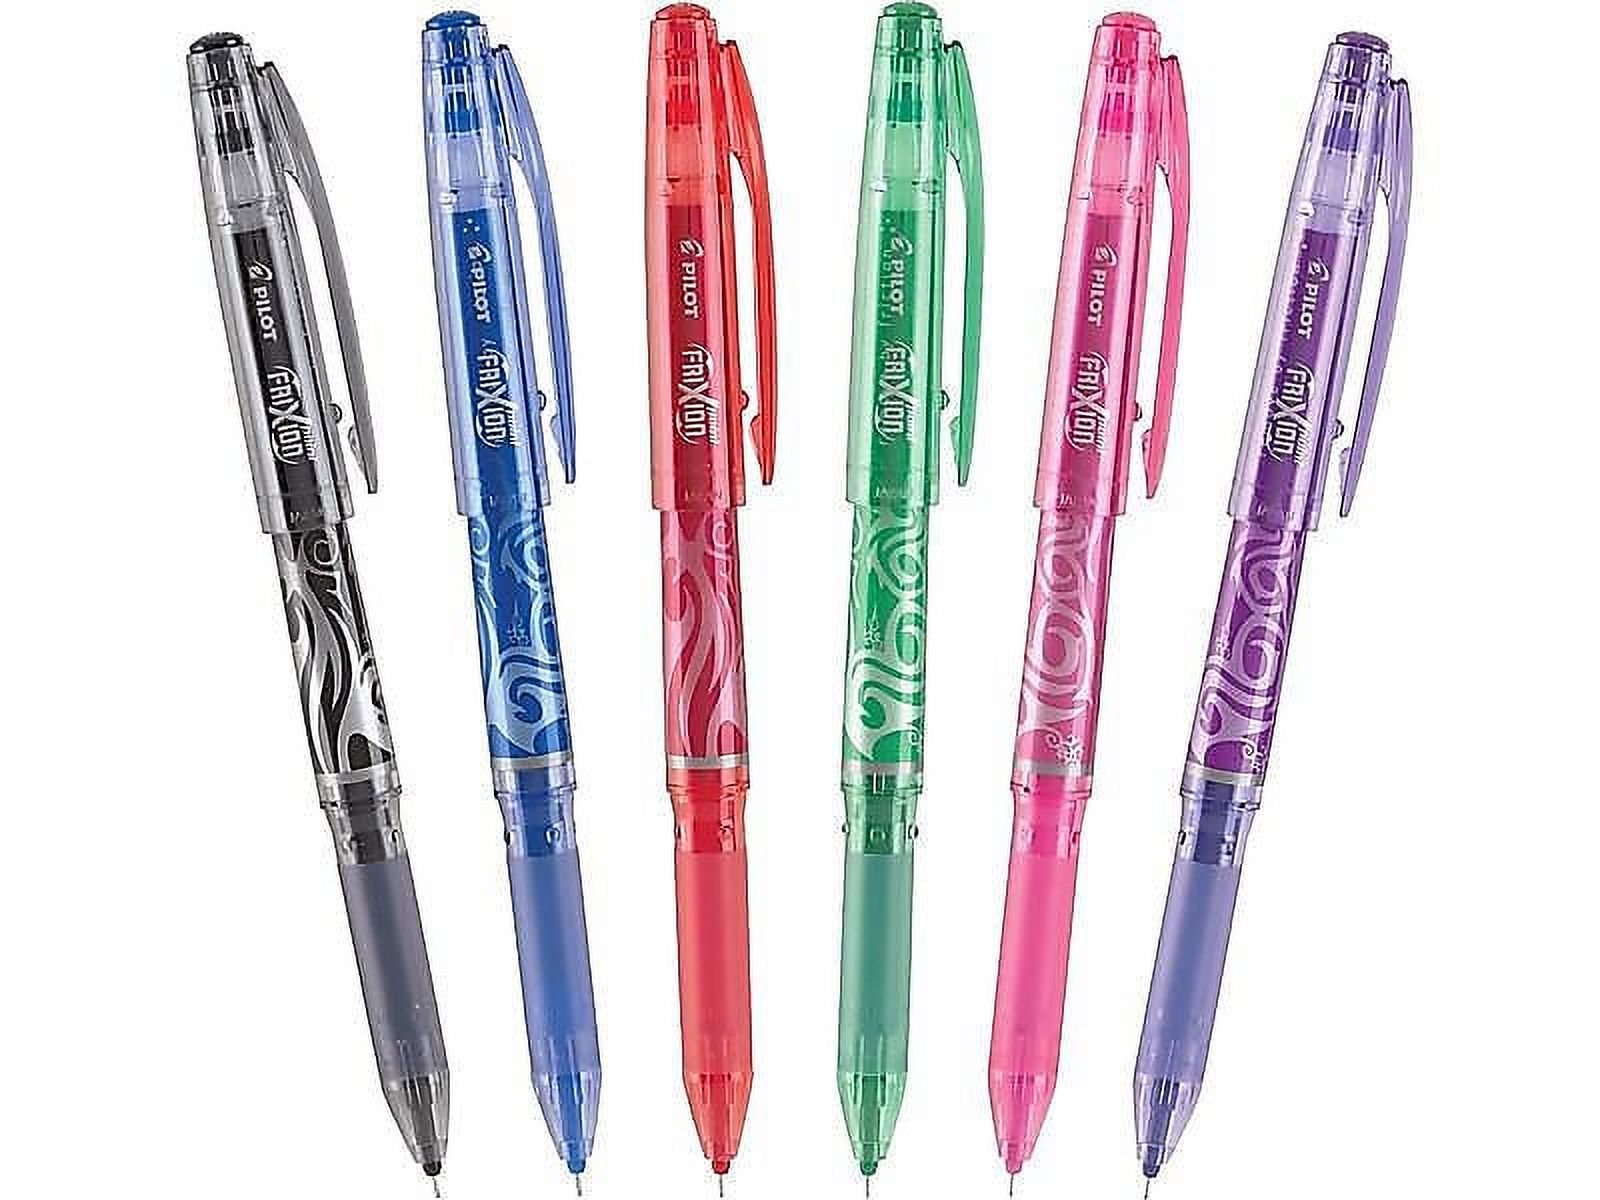 Pilot FriXion Point Erasable Gel Pens Extra Fine Point Assorted Ink 324192  